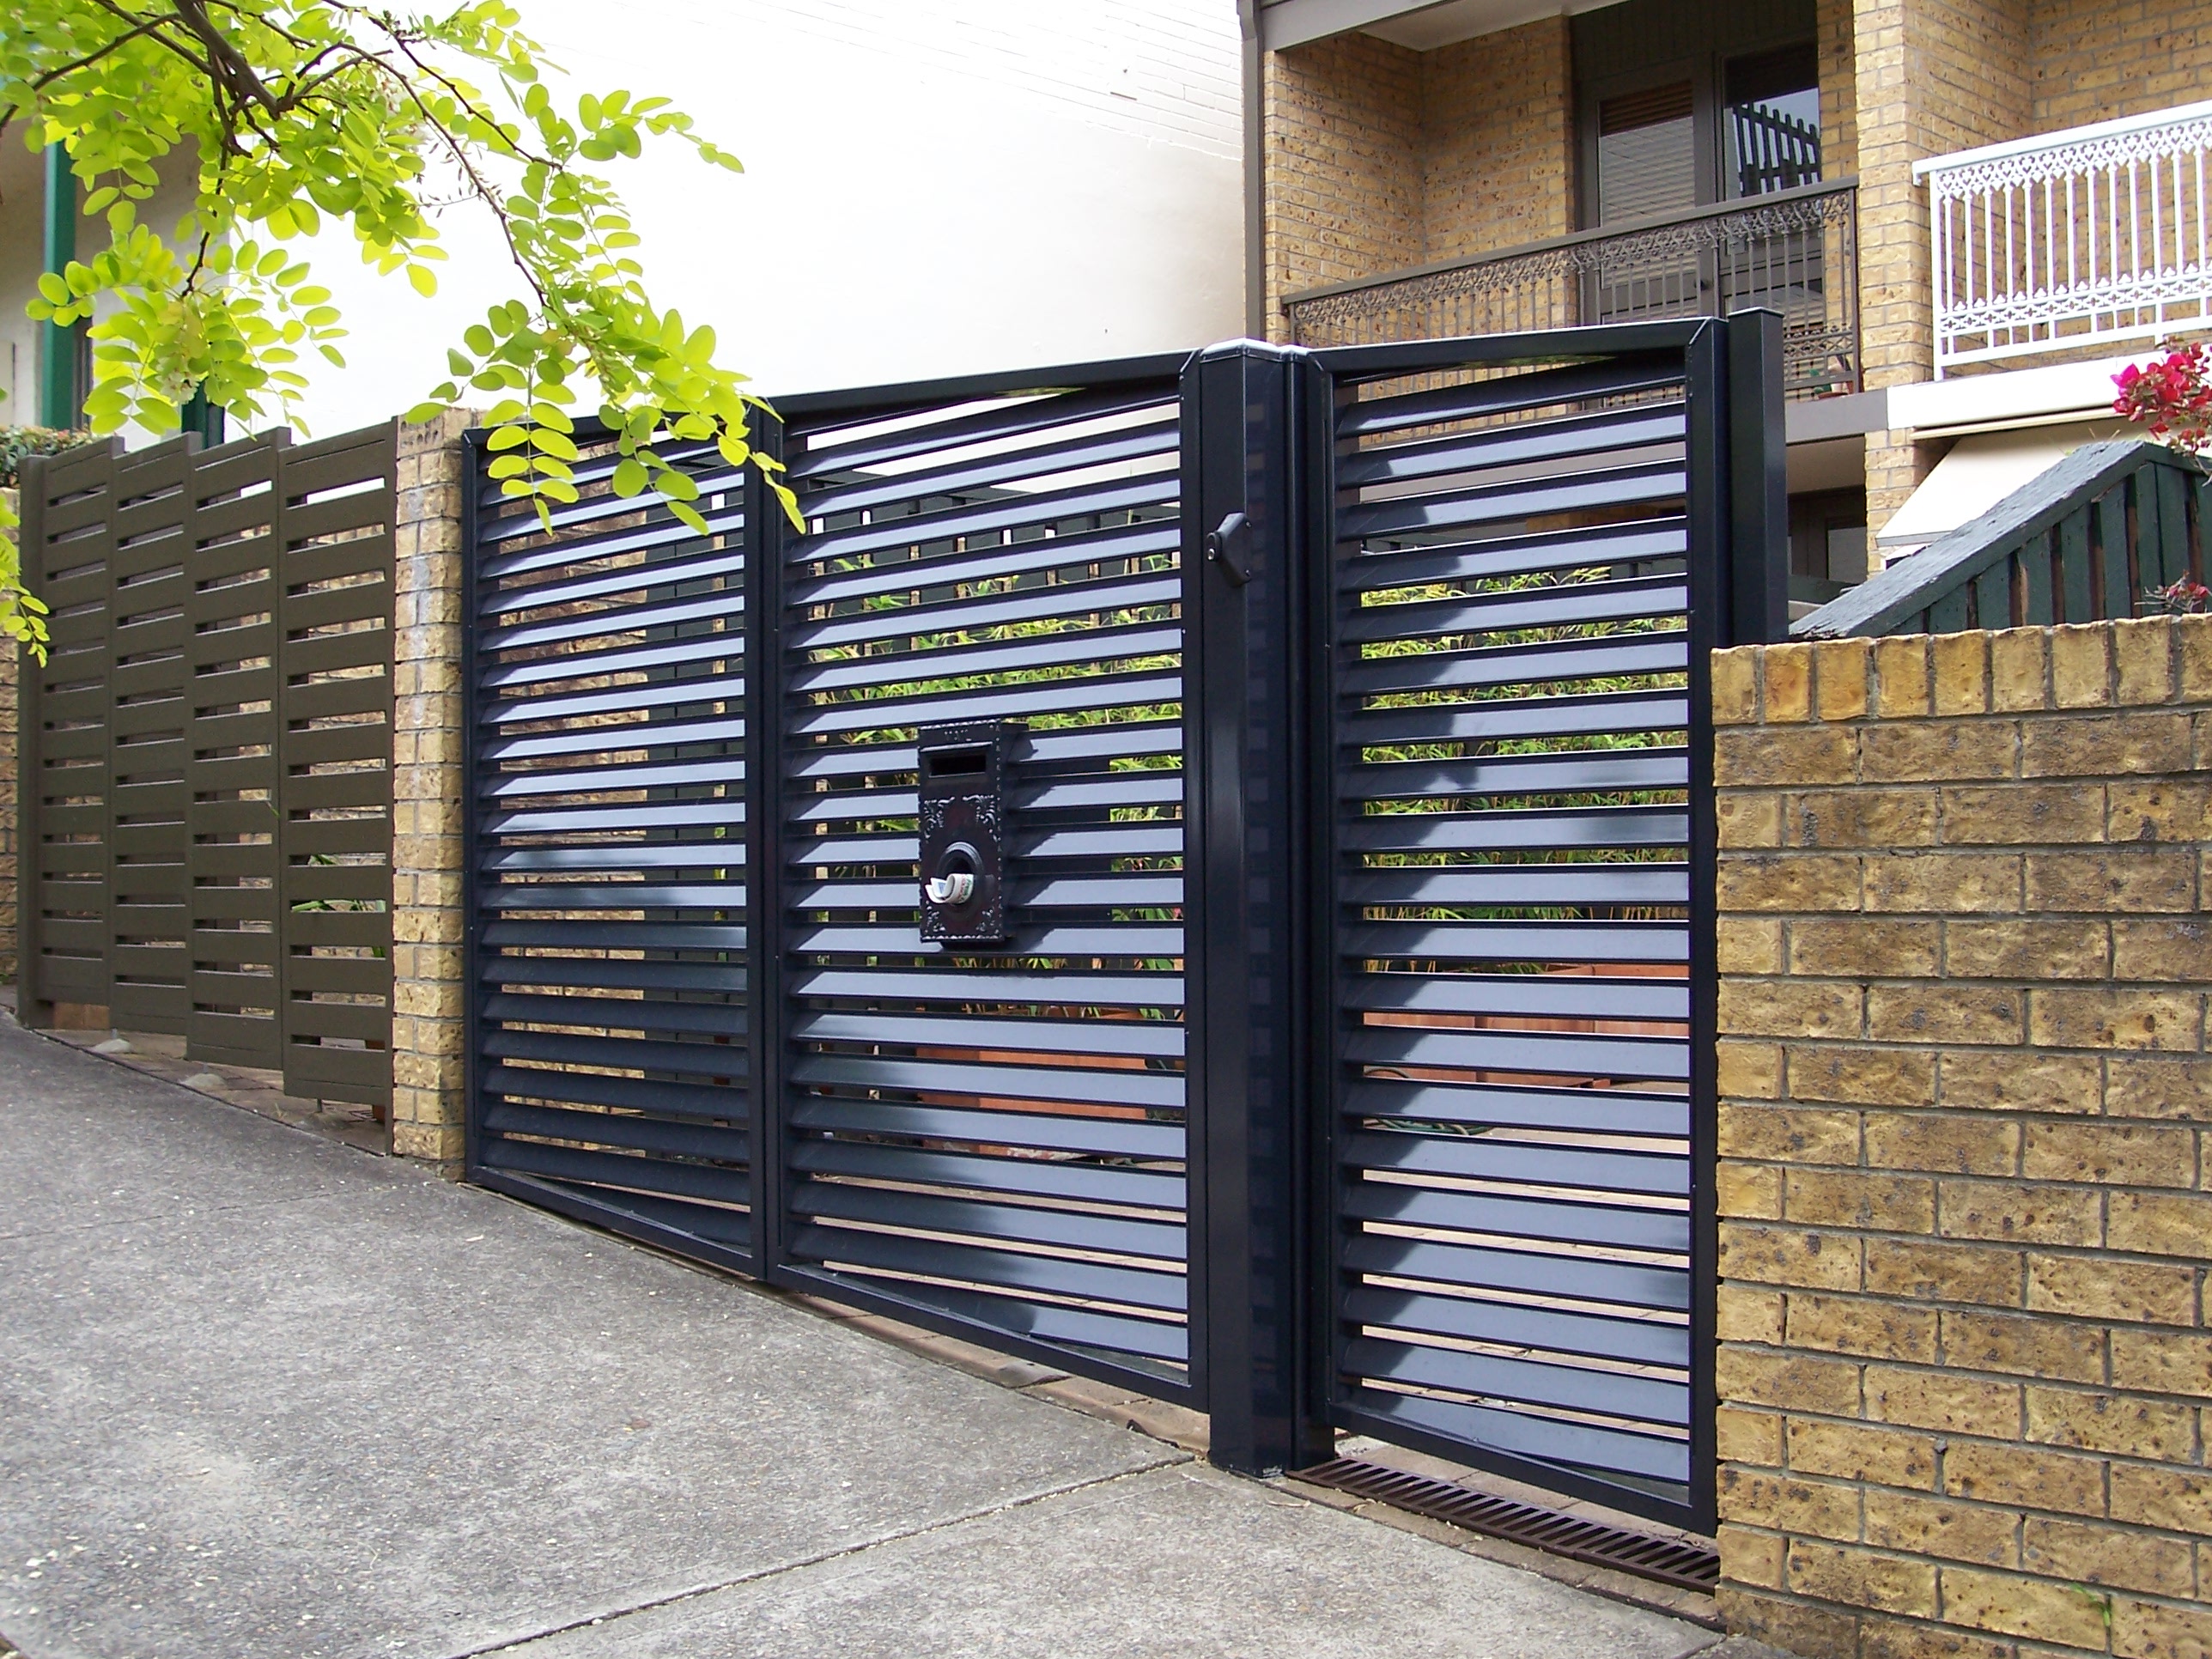 Images Dunn & Farrugia Fencing And Gates